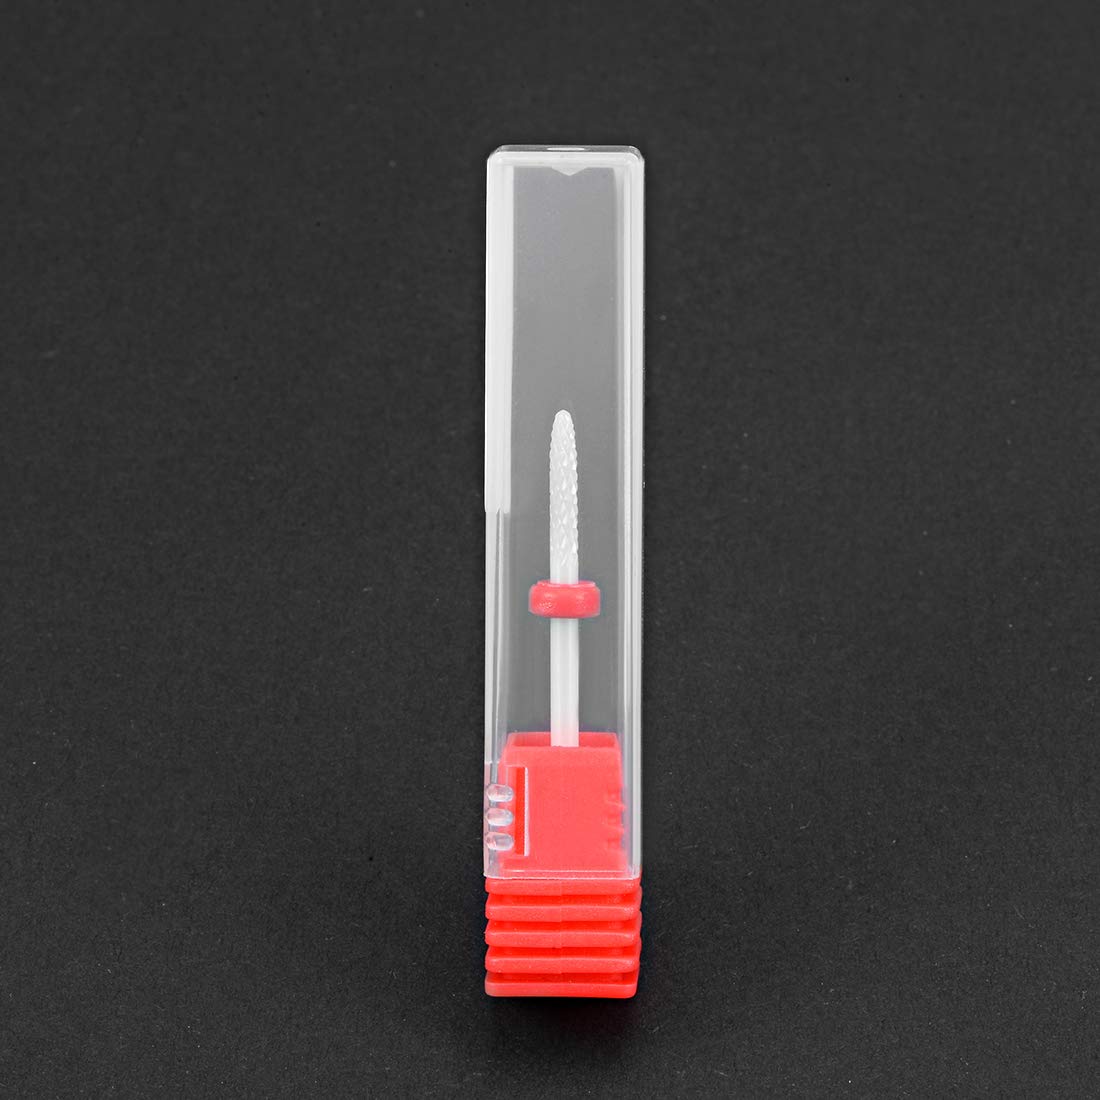 uxcell 2pcs Ceramic Nail Drill Bits 3/32 Inch (Fine Grit) for Manicure Pedicure Cuticle Gel Nail Polishing